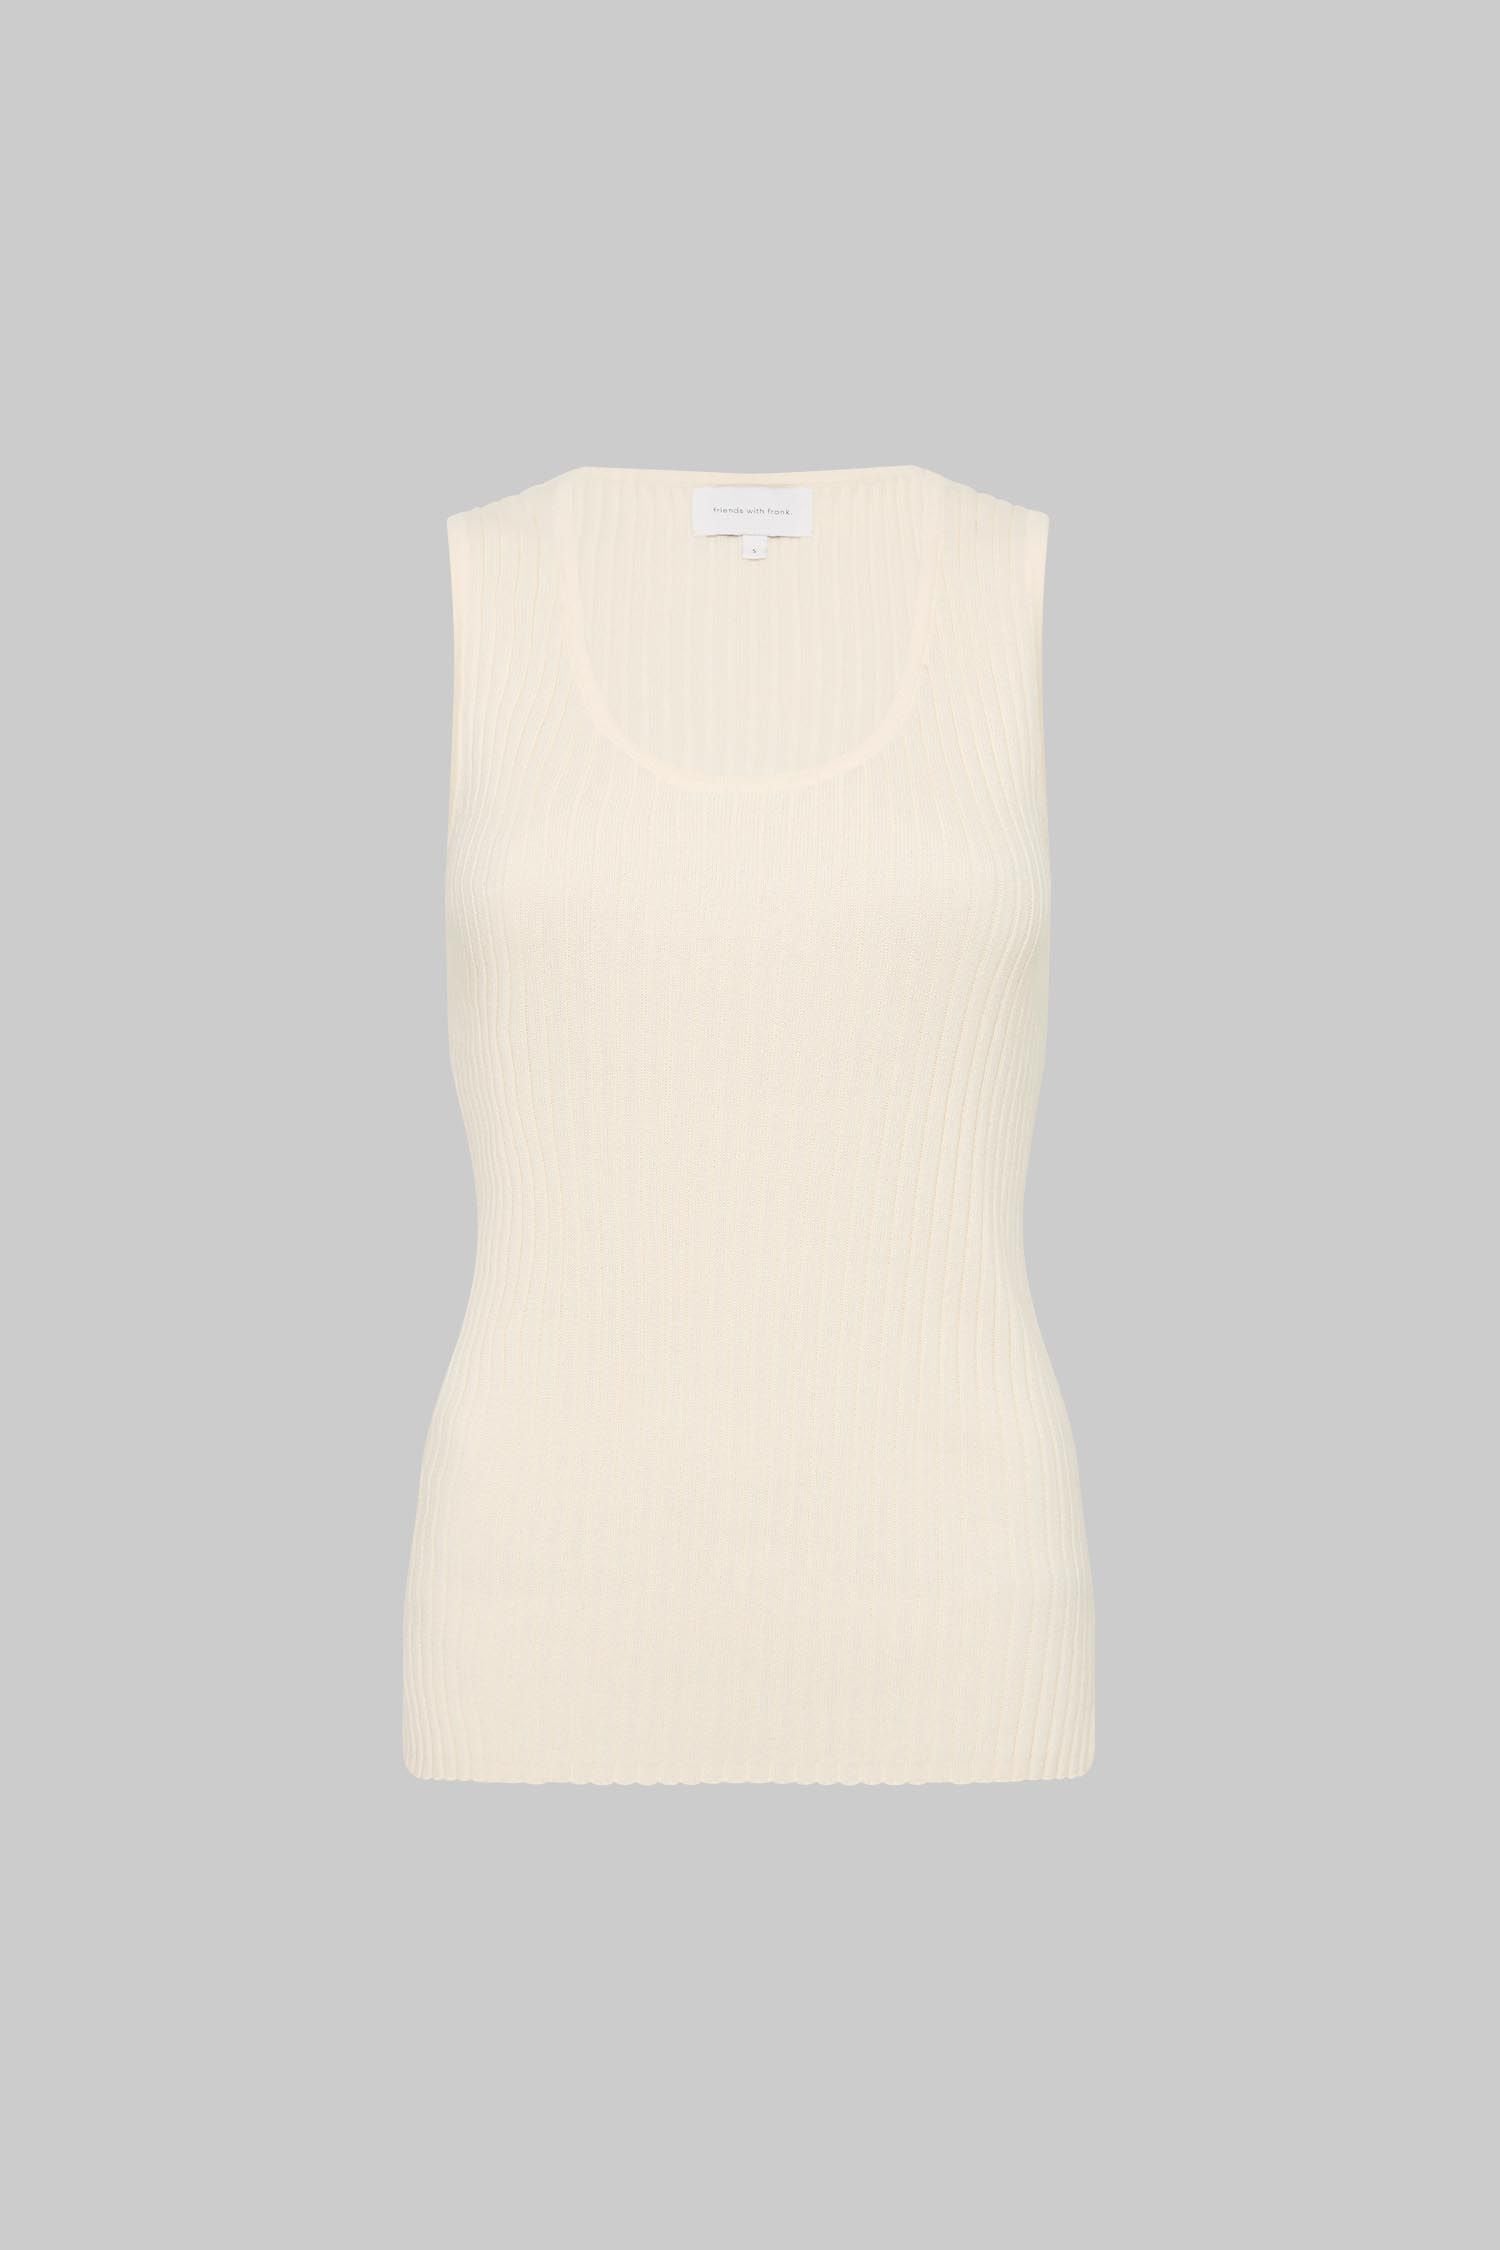 Friends with Frank Cleo Tank - Cream